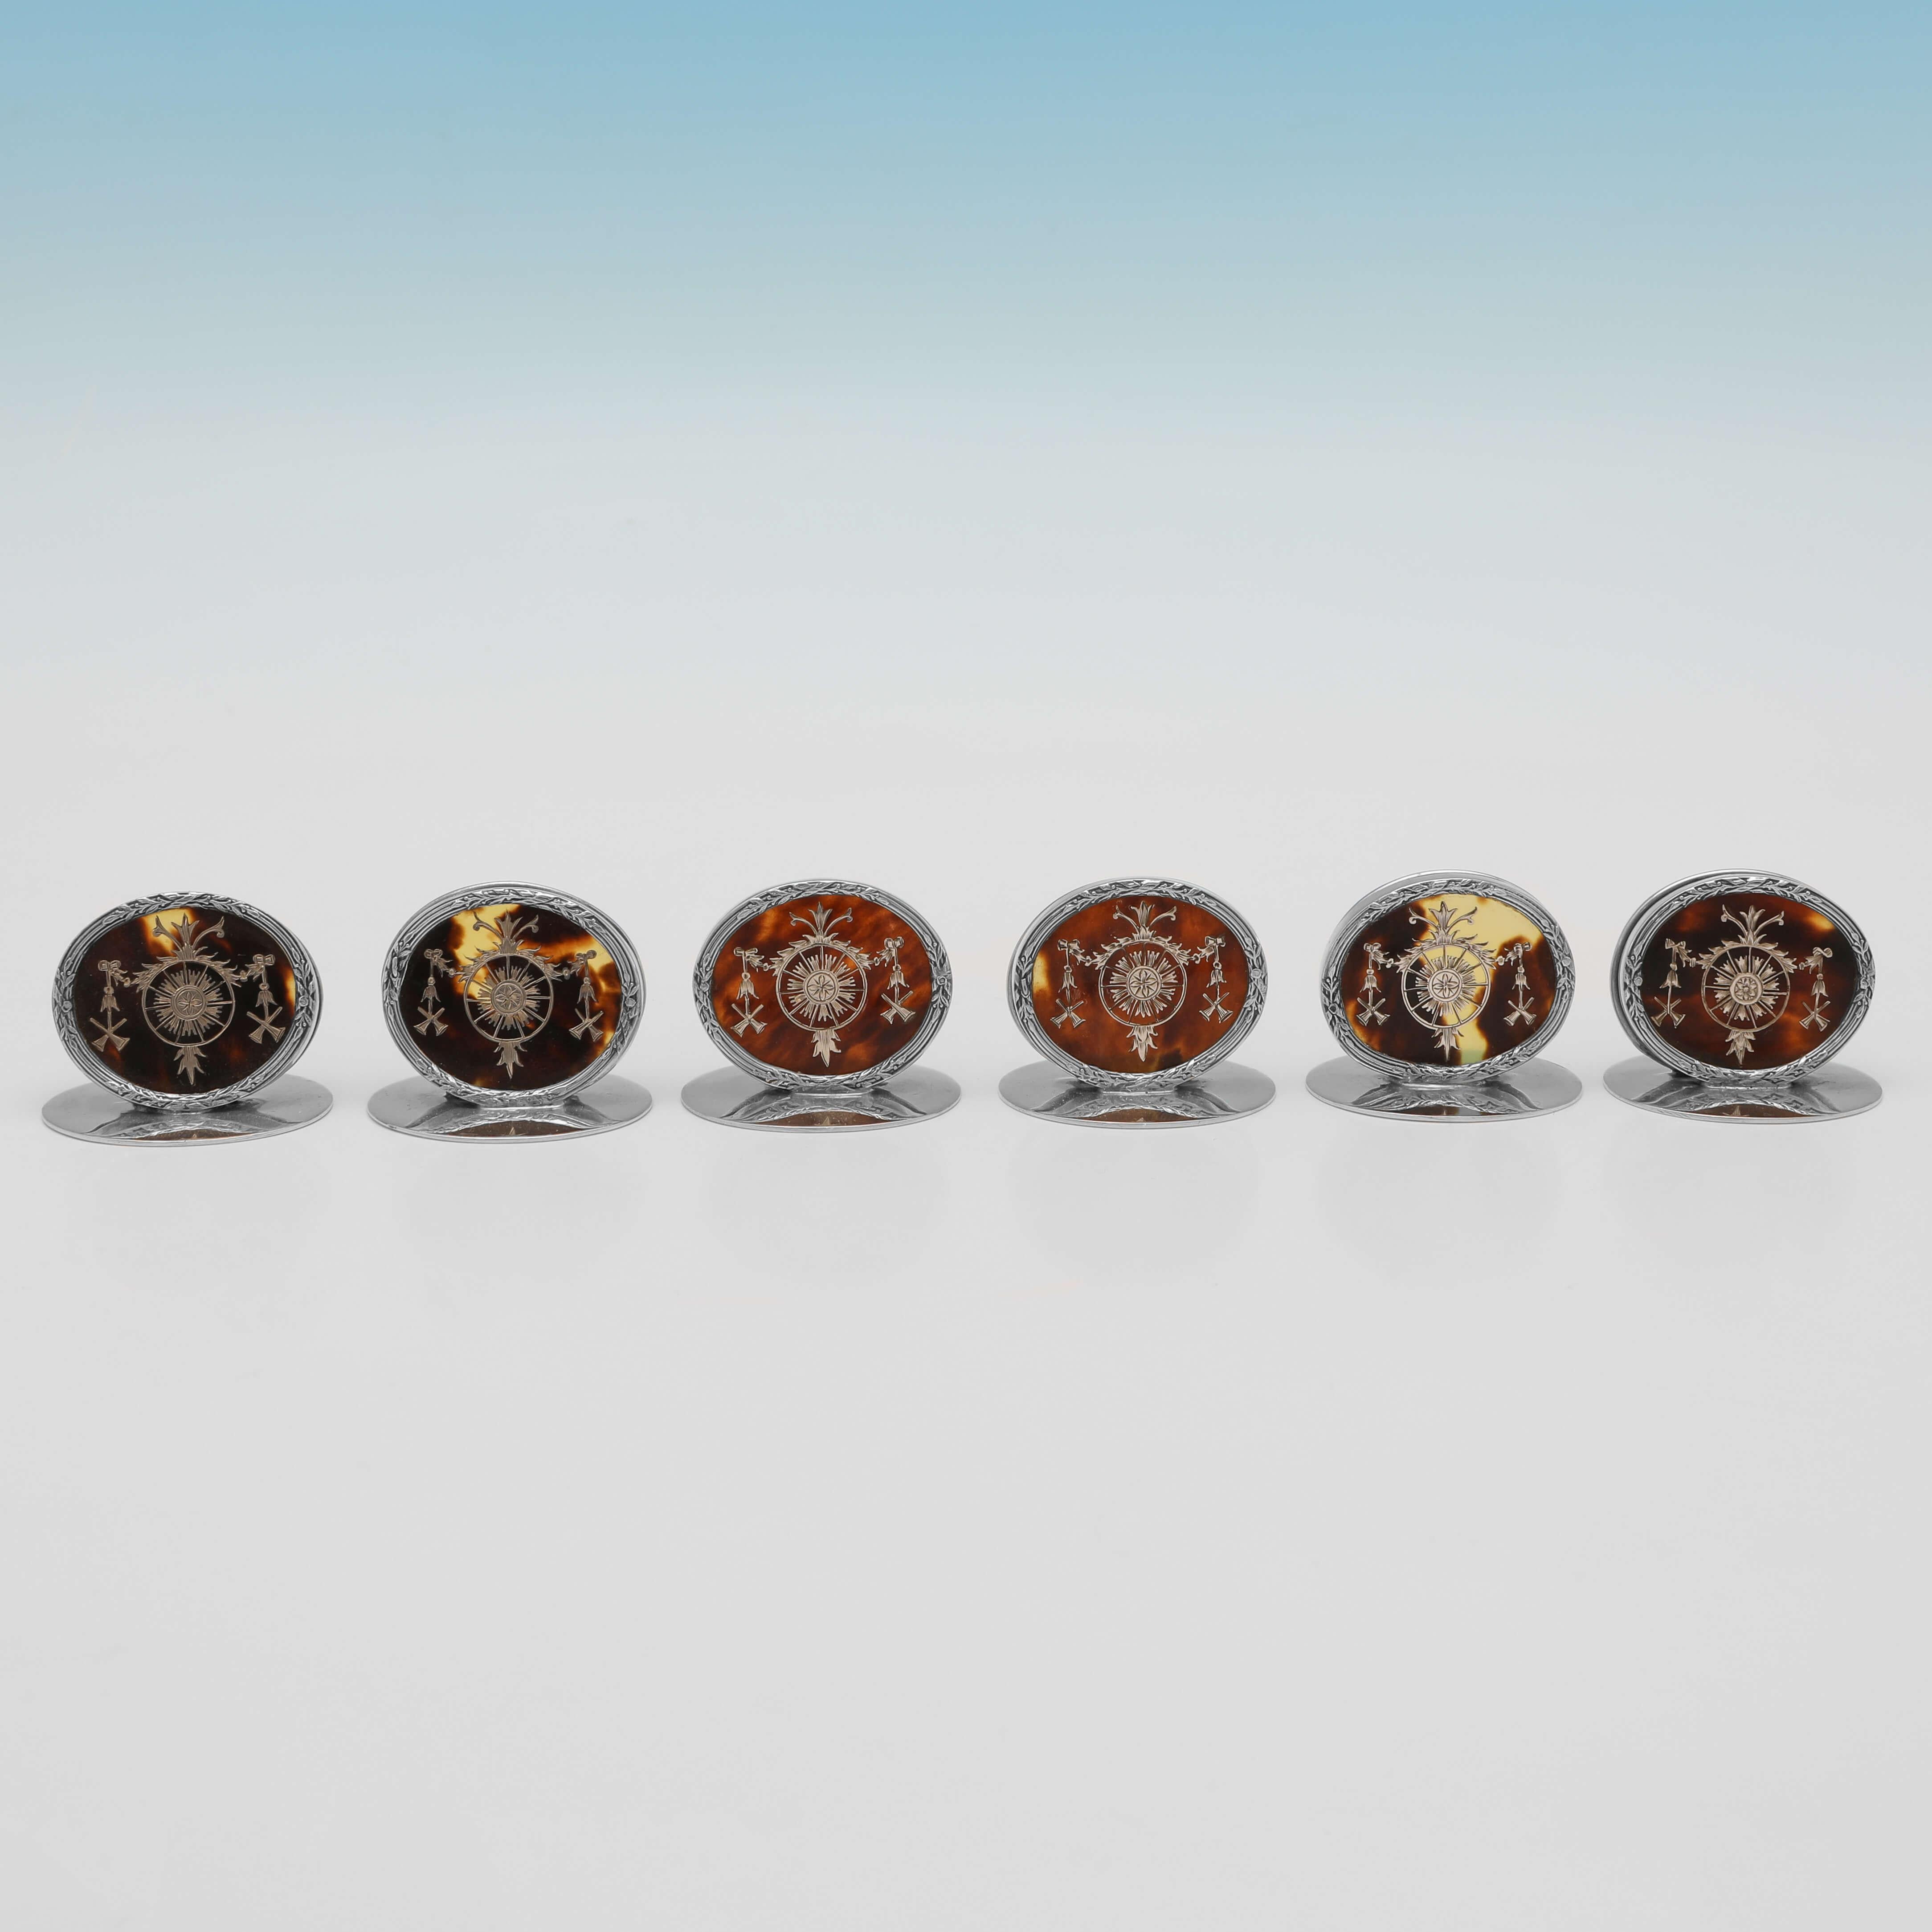 Hallmarked in London in 1914 by William Comyns, this very attractive set of 6, Antique Tortoiseshell & Sterling Silver Place Card Holders or Menu Holders, feature silver inlay to the tortoiseshell and are presented in their original box. Each place